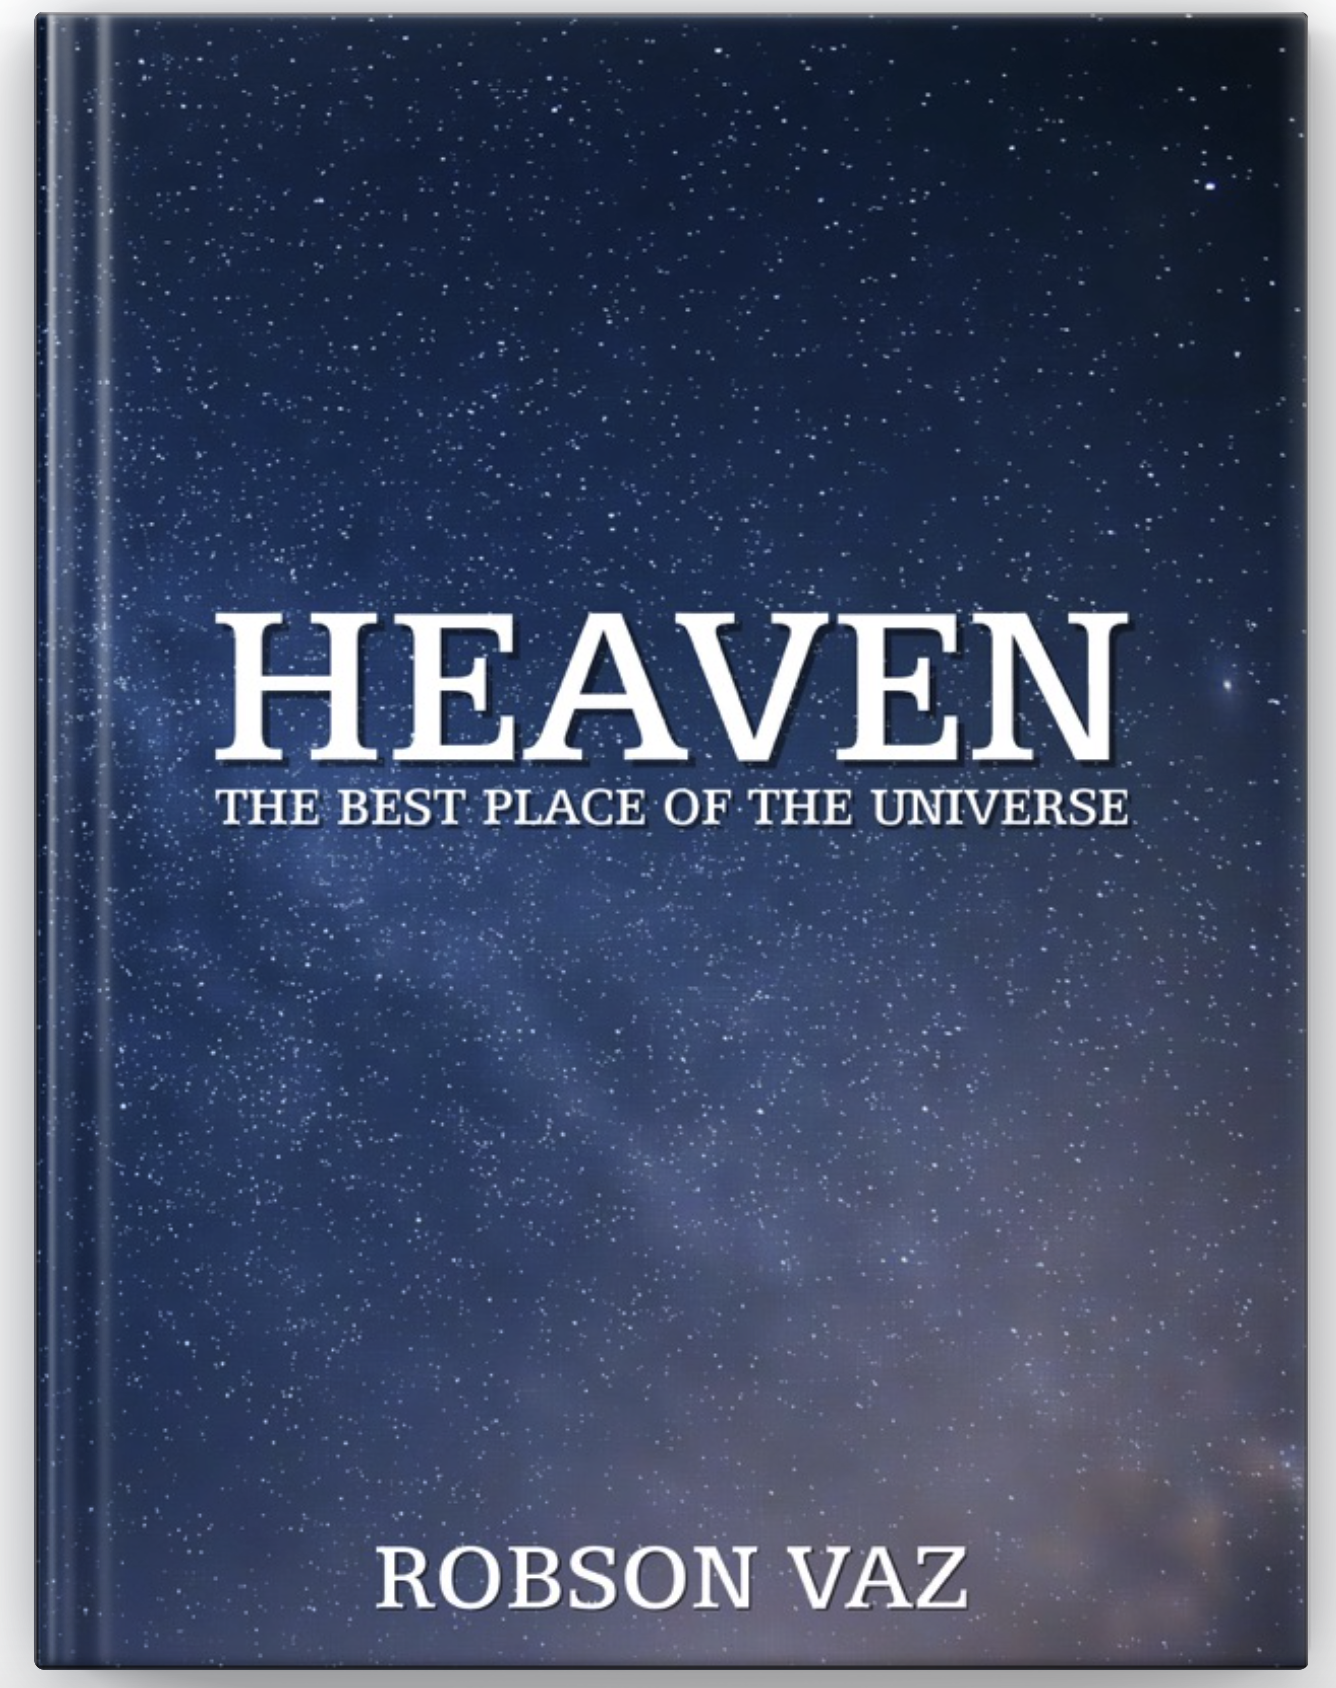 Robson Vaz's Newly Released 'Heaven: The Best Place of the Universe' is a Touching Read Filled With Thought-Provoking Truths